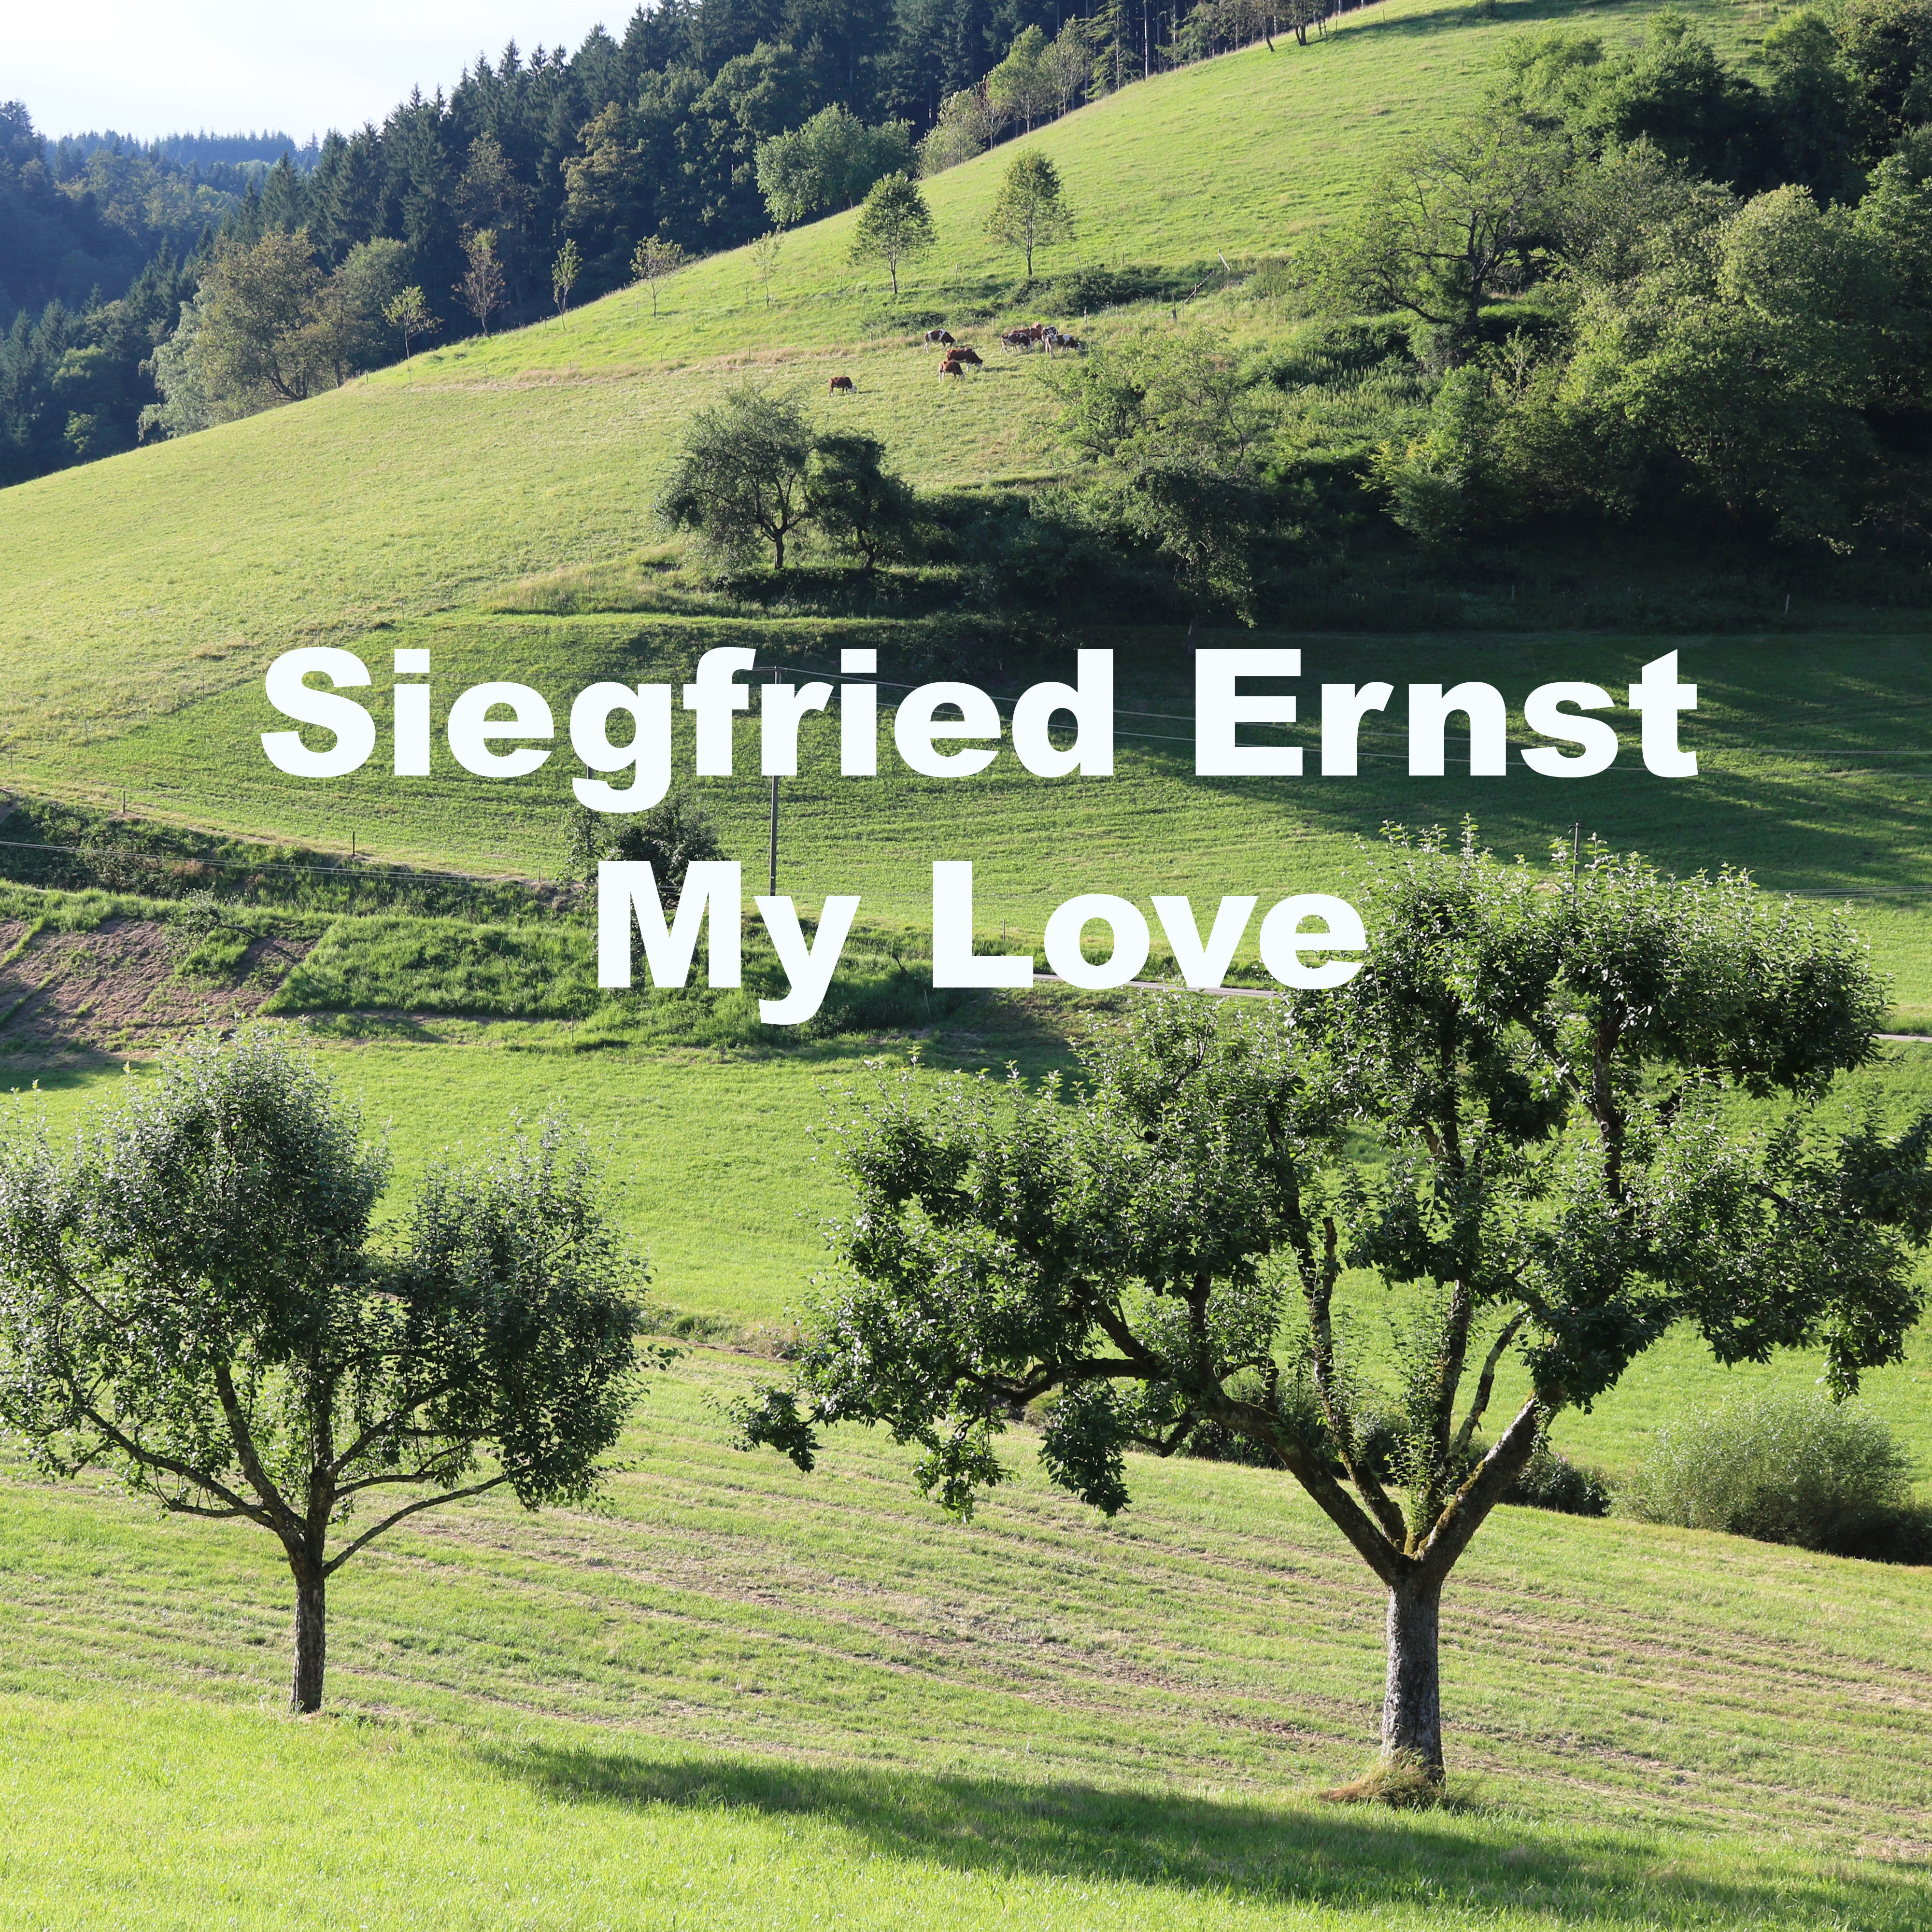 Siegfried Ernst on piano live in concert EP "My Love" fan collection wav and mp3 version of all songs - ralfchristophkaiser.com Musik und Noten